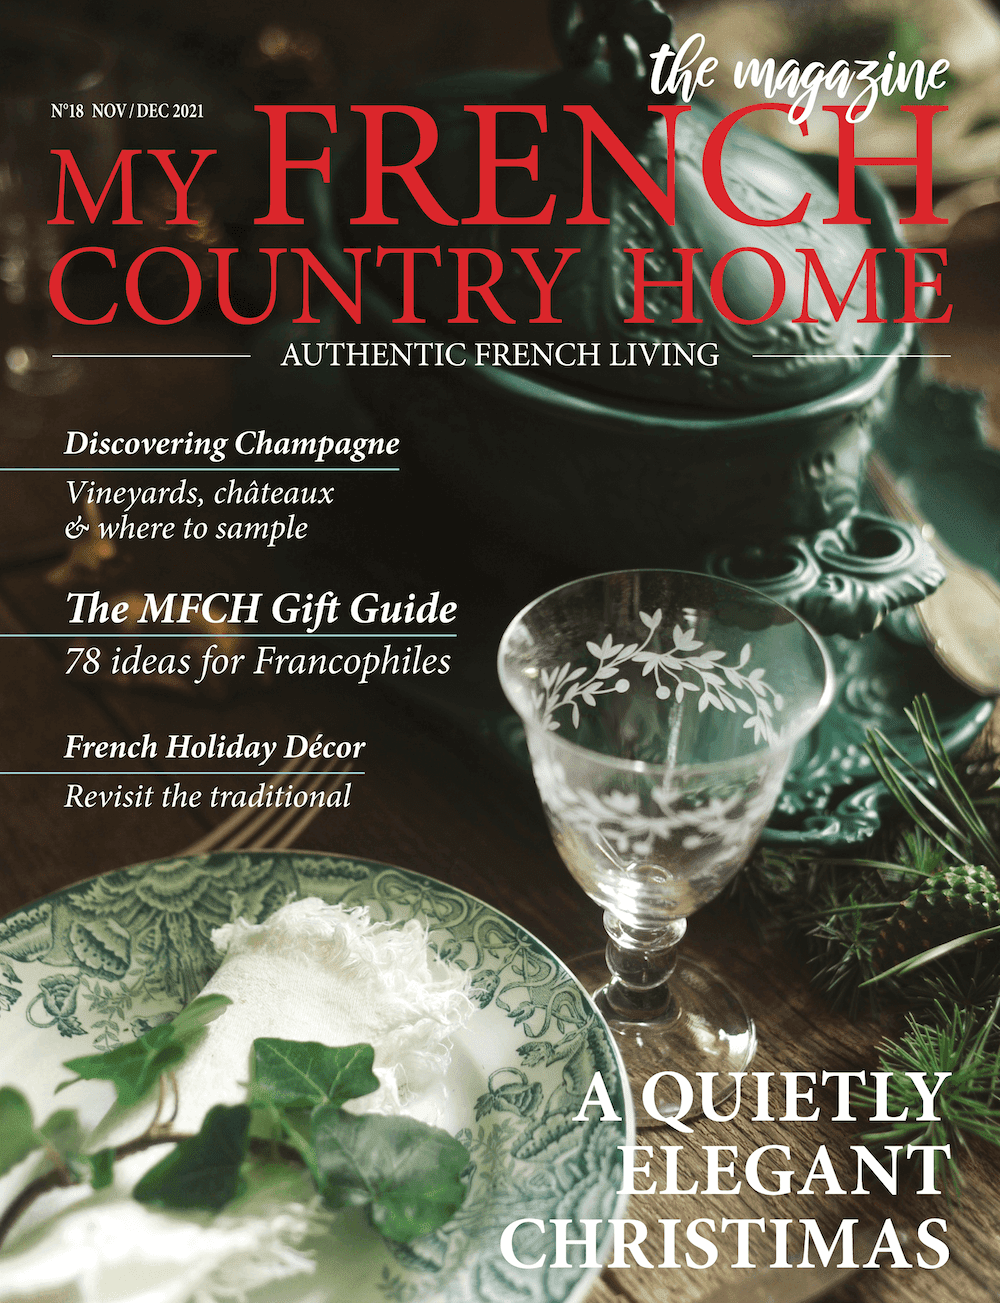 My French Country Home Magazine - November/December 2021